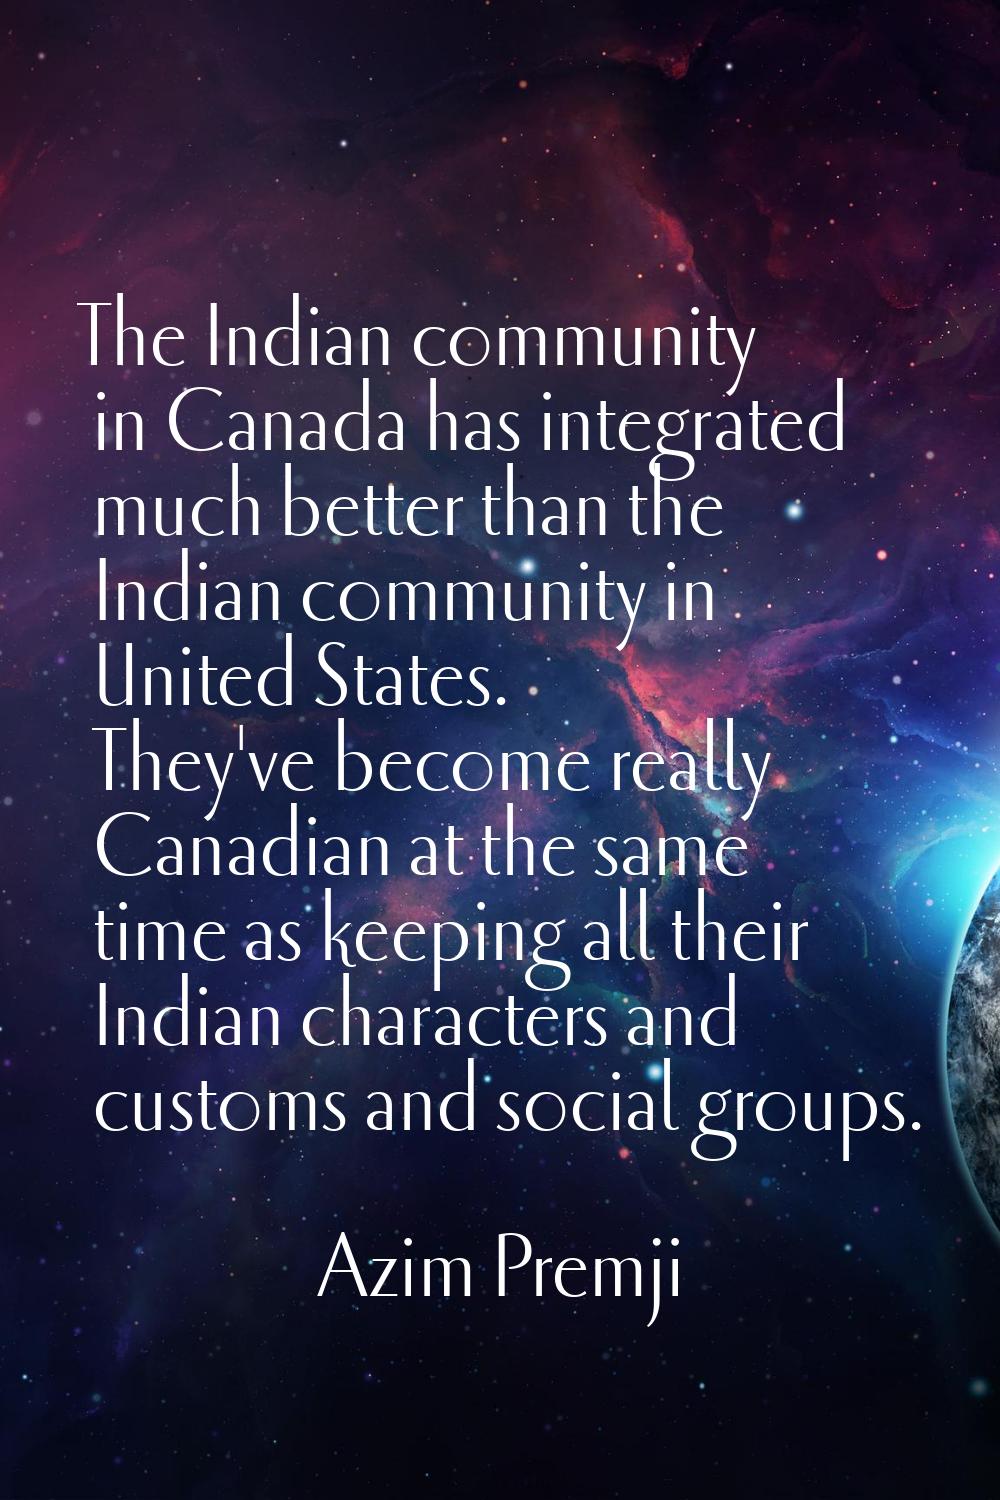 The Indian community in Canada has integrated much better than the Indian community in United State